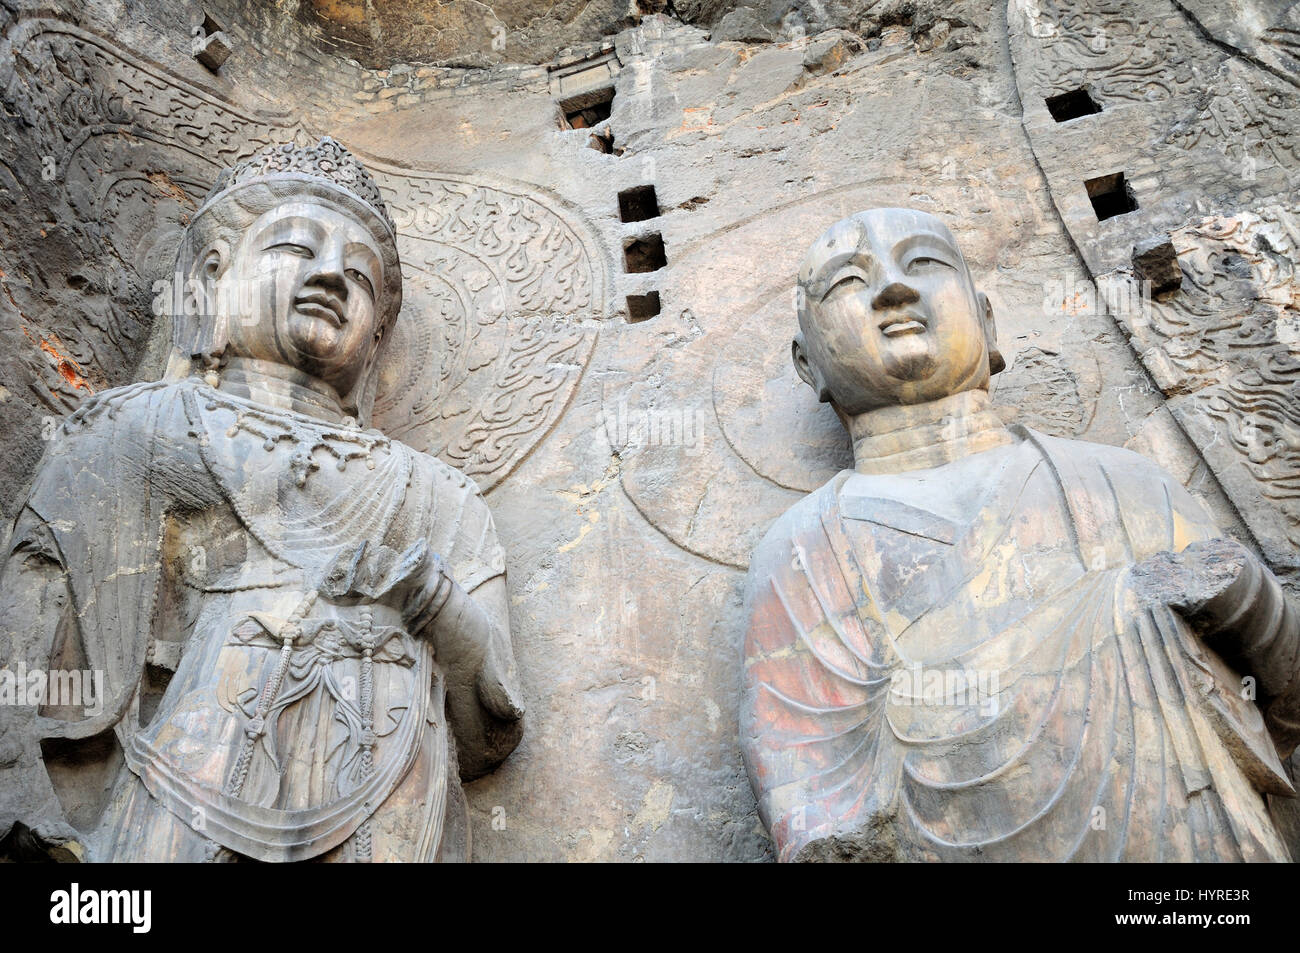 A stone Buddha statues Fengxiansi cave at Longmen grottoes in Luoyang China Henan province. Stock Photo